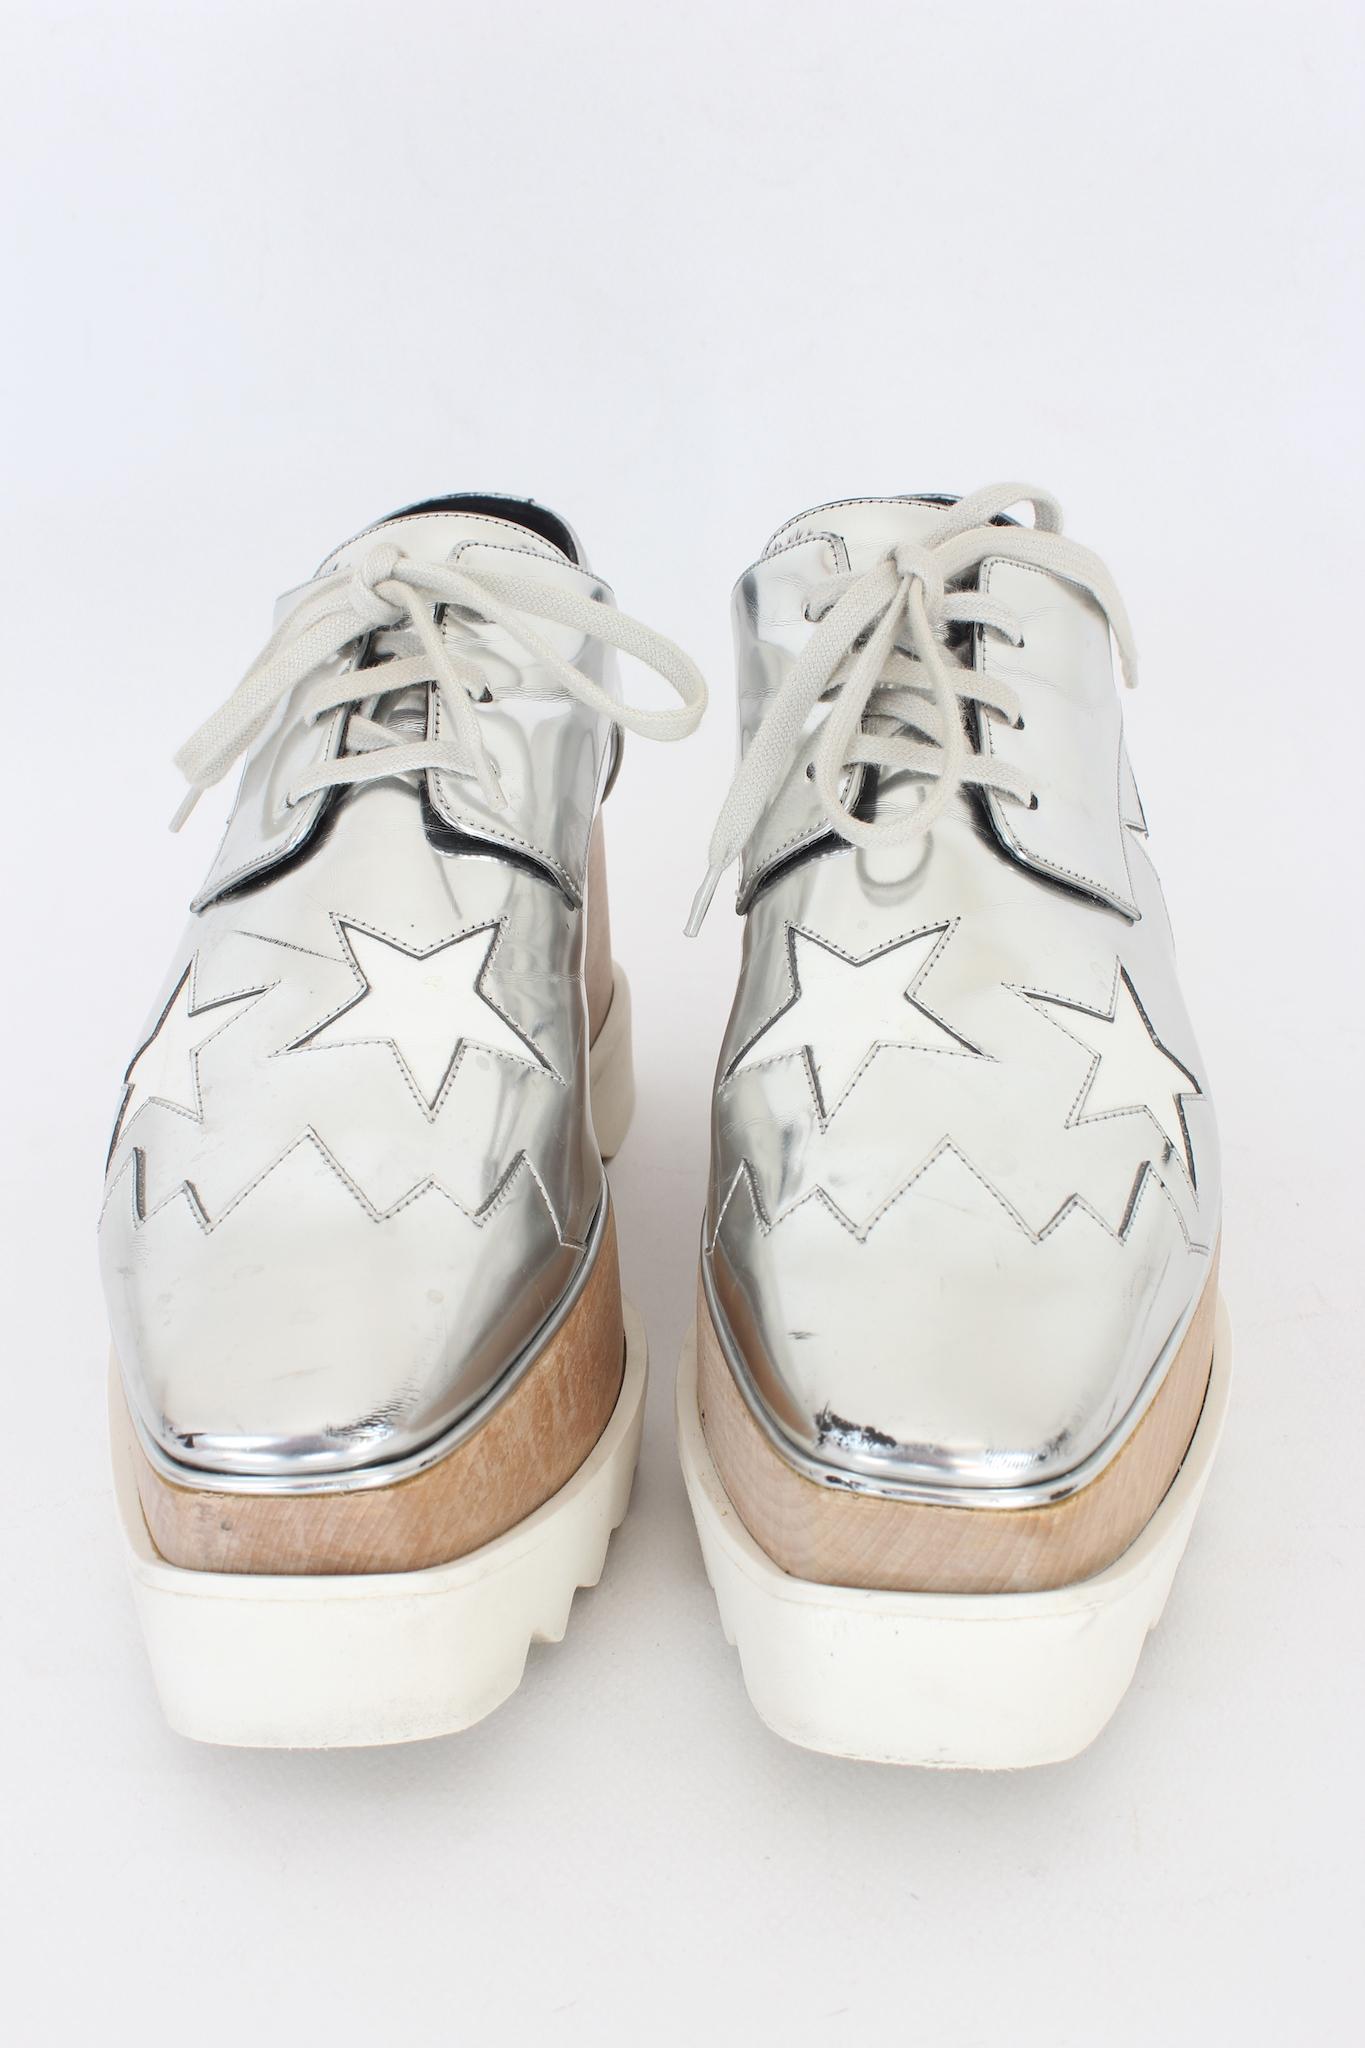 Stella McCartney 2020s Elyse sneaker shoe. Silver eco-leather shoe with white leather stars. Square toe, lace closure. Beige wooden midsole and serrated white rubber outsole. Made in Italy.

Code: 363998

Size: 40, 5 It 10.5 Us 7.5 Uk

Heel height: